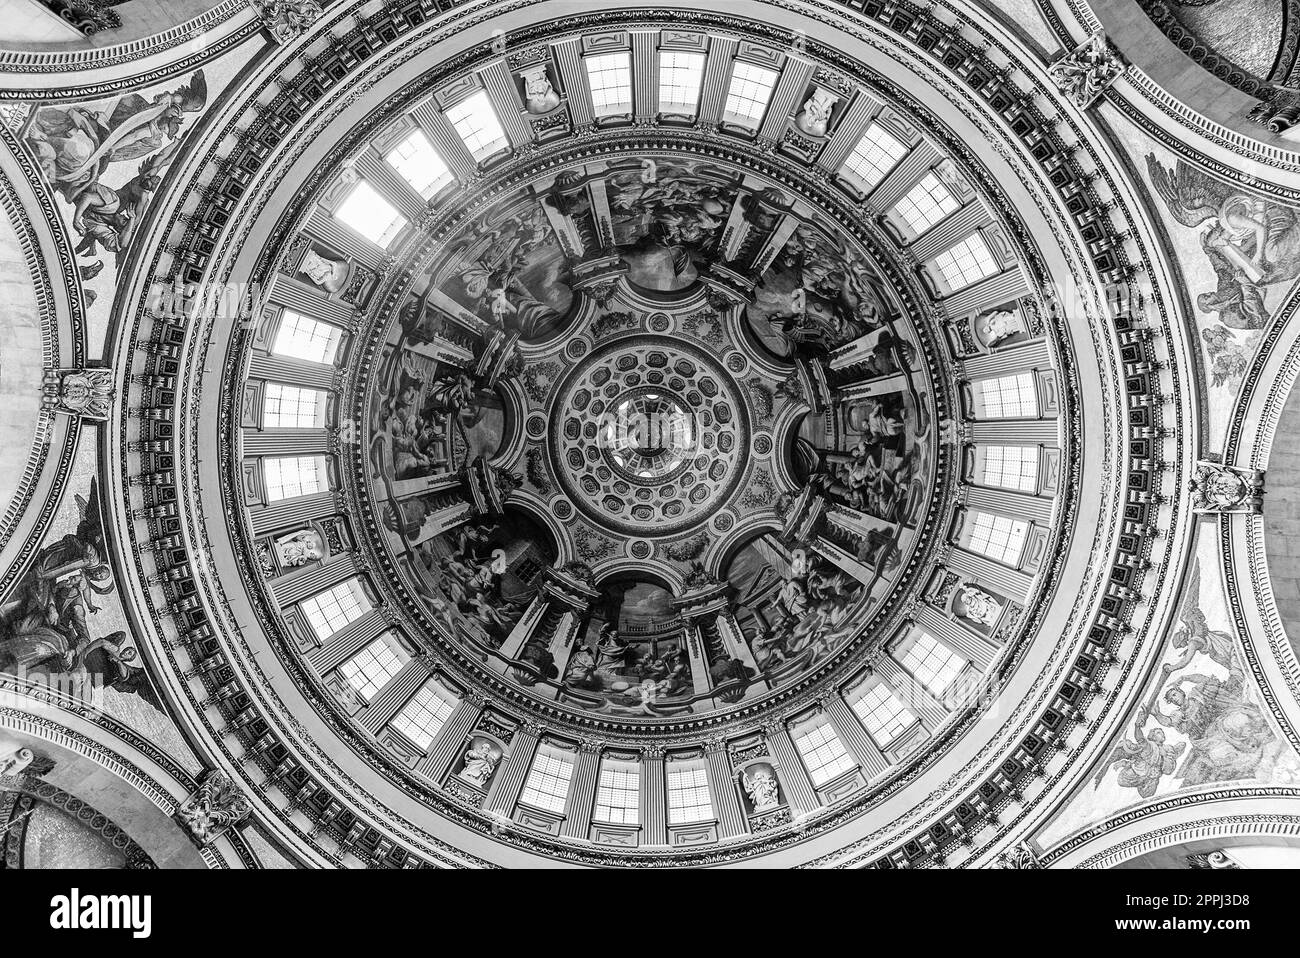 Ceiling of the Dome of St Paul's Cathedral, London, UK Stock Photo